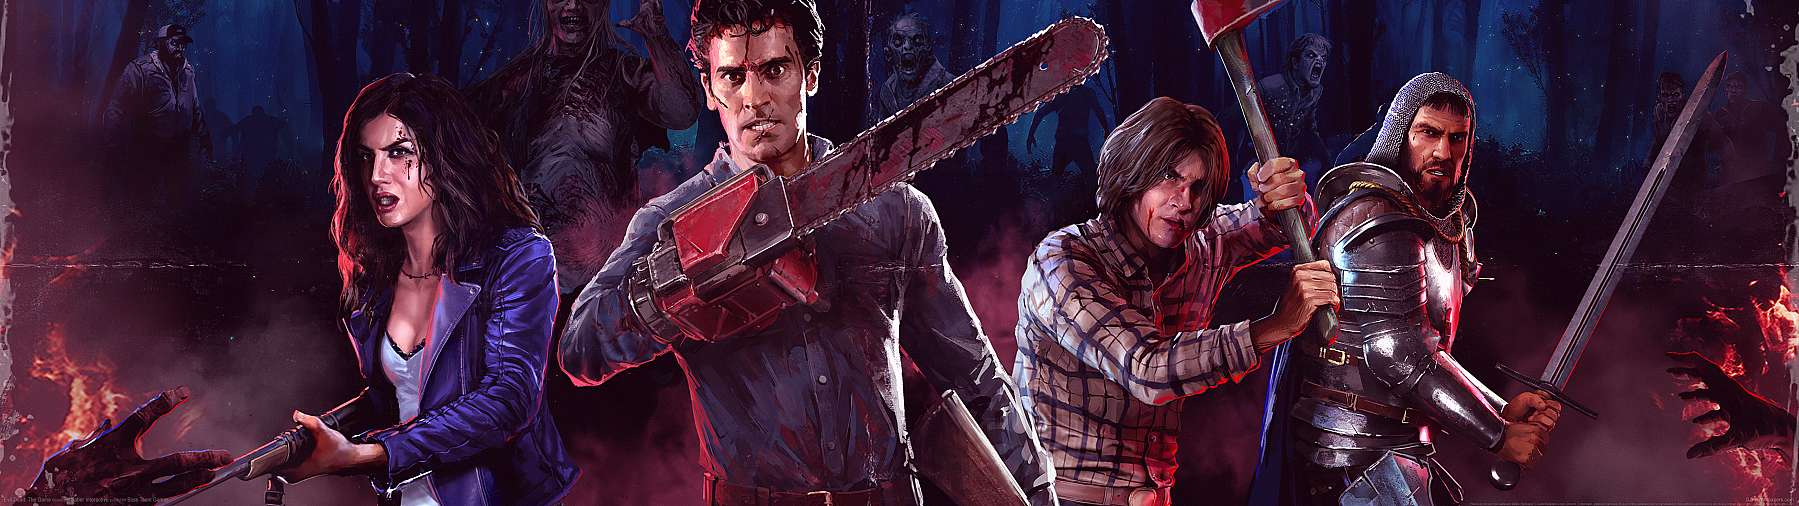 Evil Dead: The Game wallpaper or background